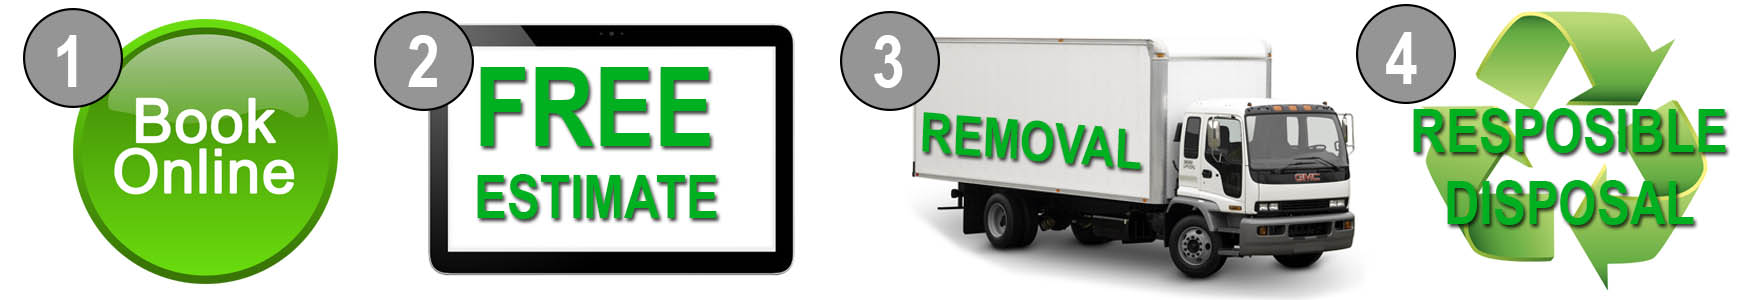 STEPS FOR JUNK REMOVAL SERVICE